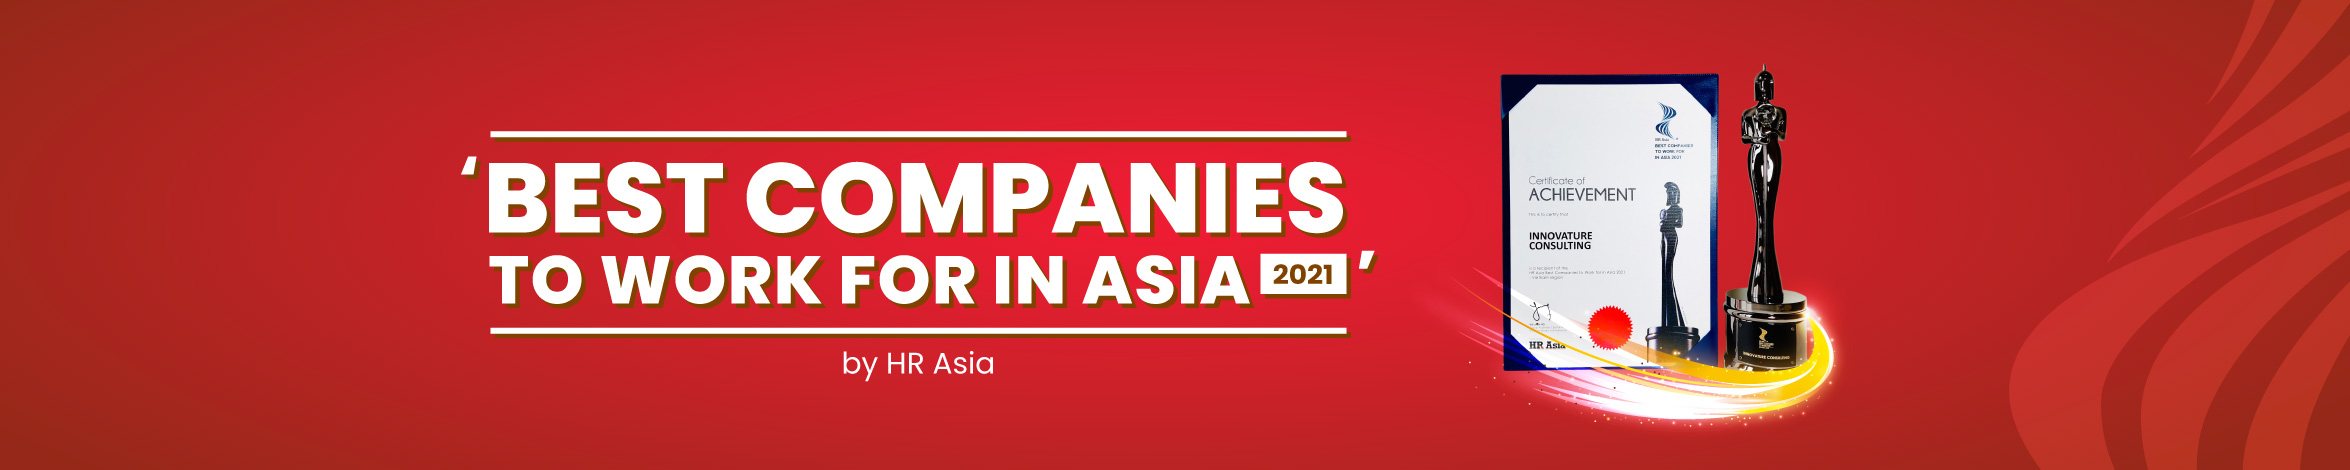 Best Companies to work for in Asia 2021 by HR Asia